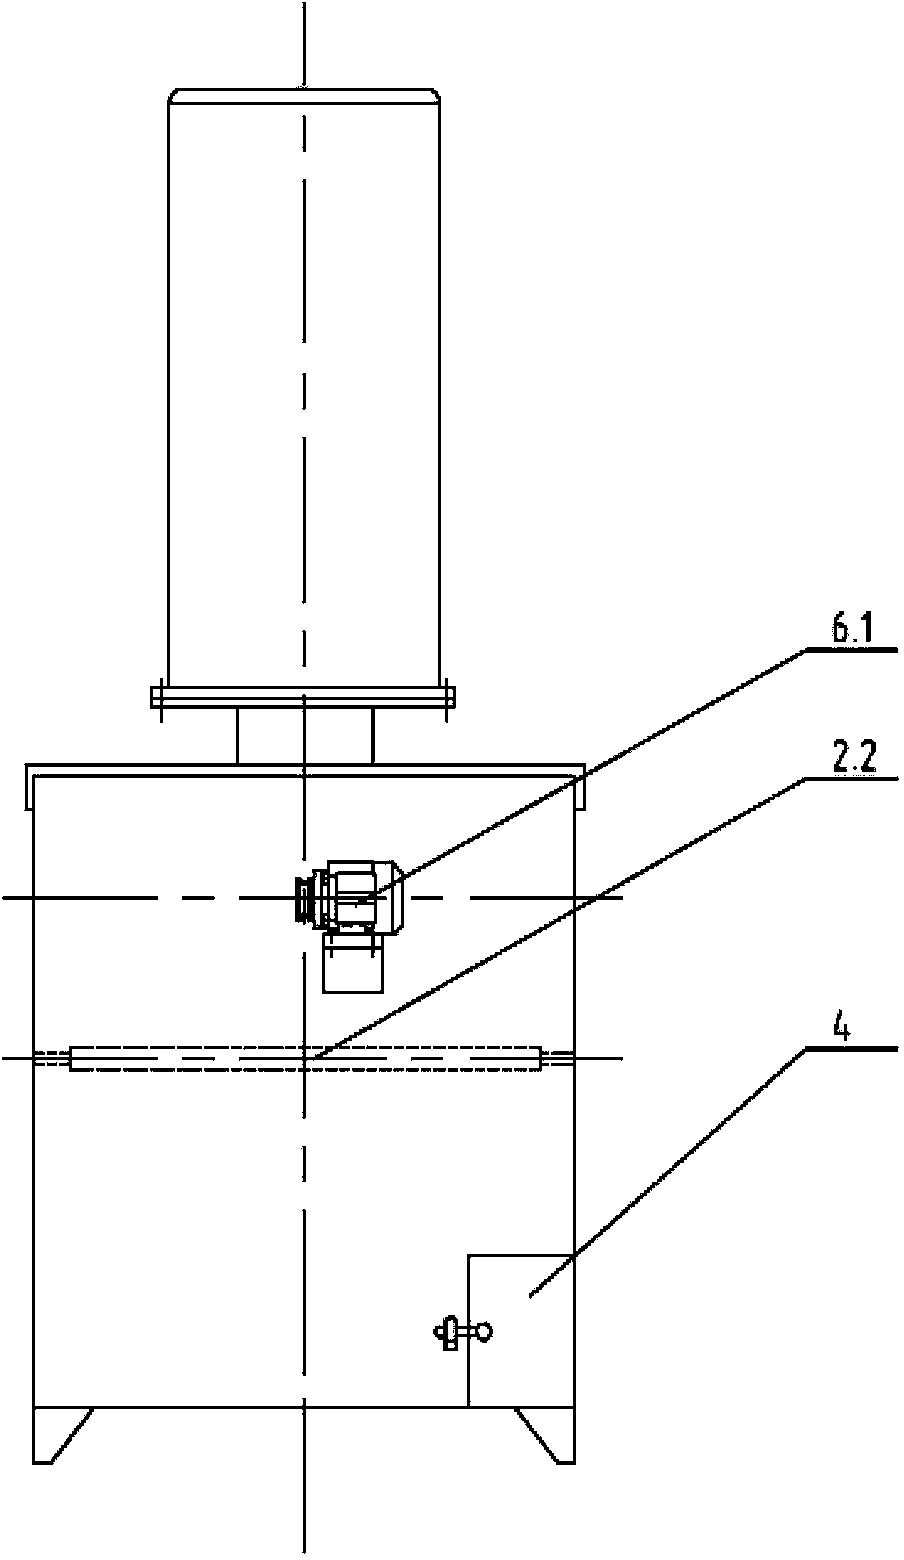 Bagged cement automatic bag-opening and discharging device for nuclear power station